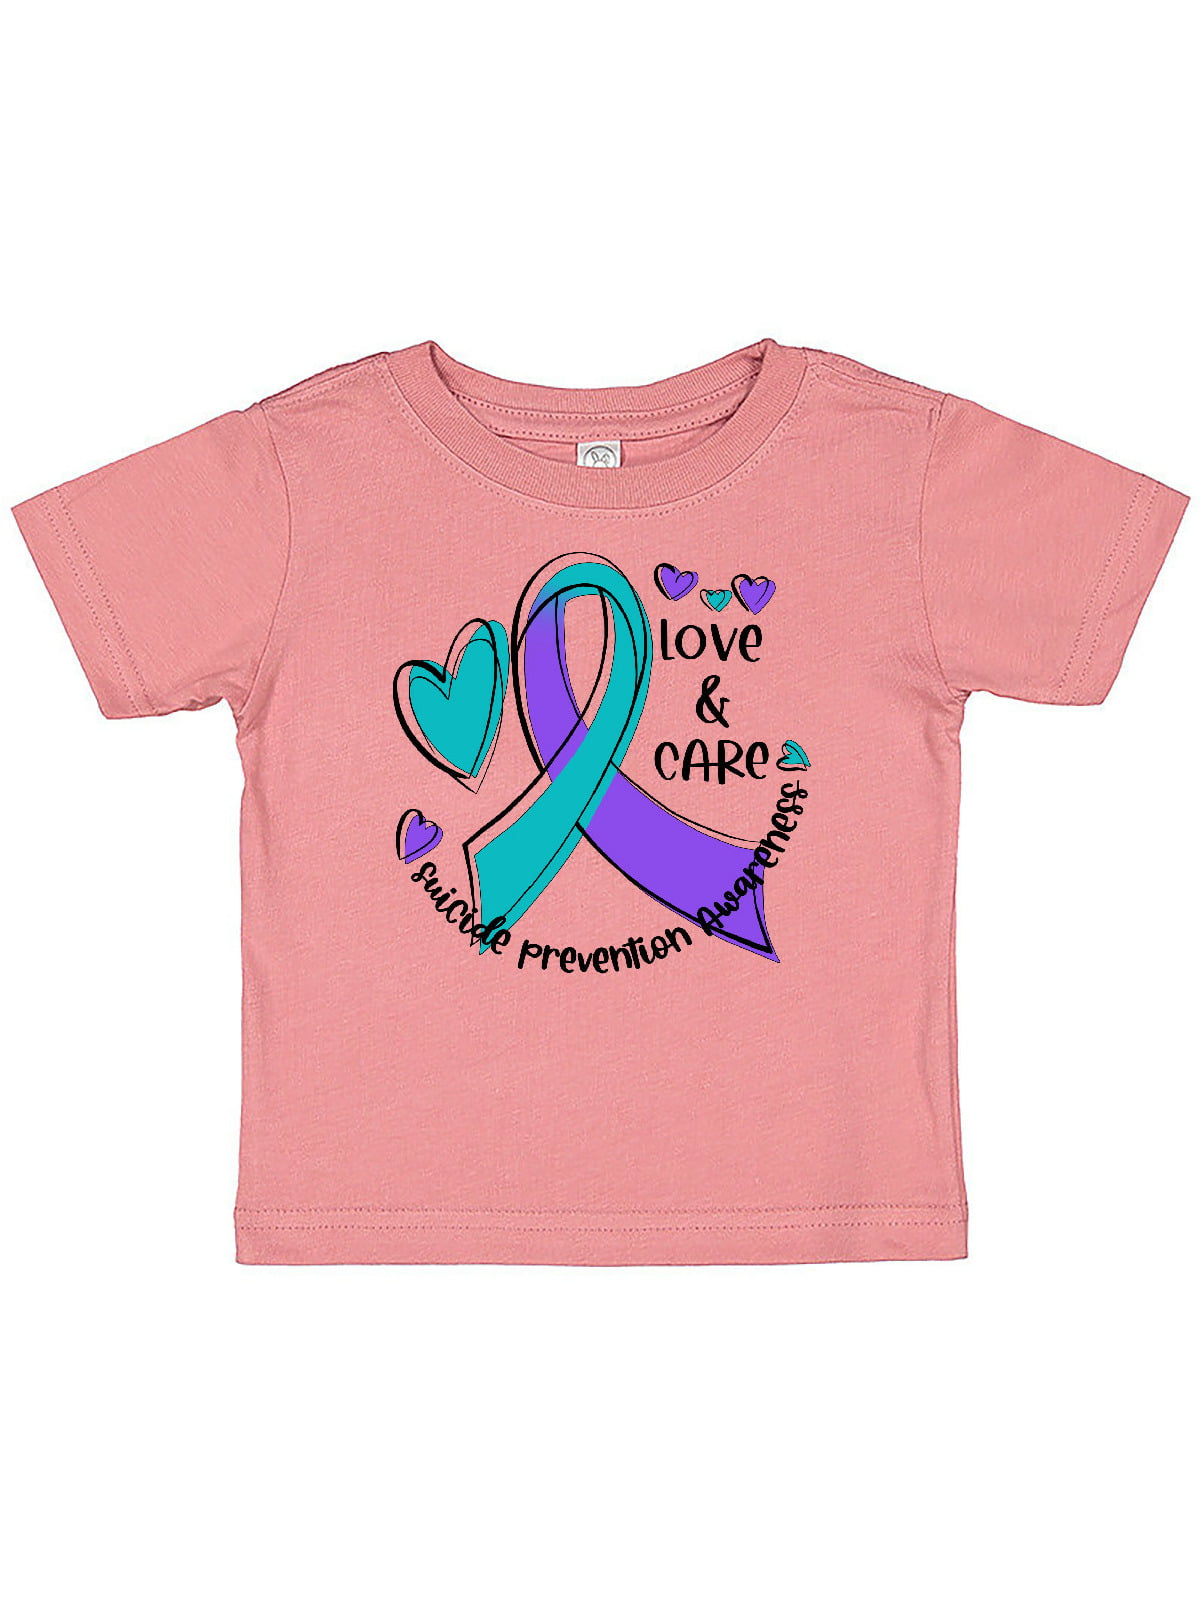 Inktastic Suicide Prevention I Wear Teal and Purple for My Infant Tutu Bodysuit